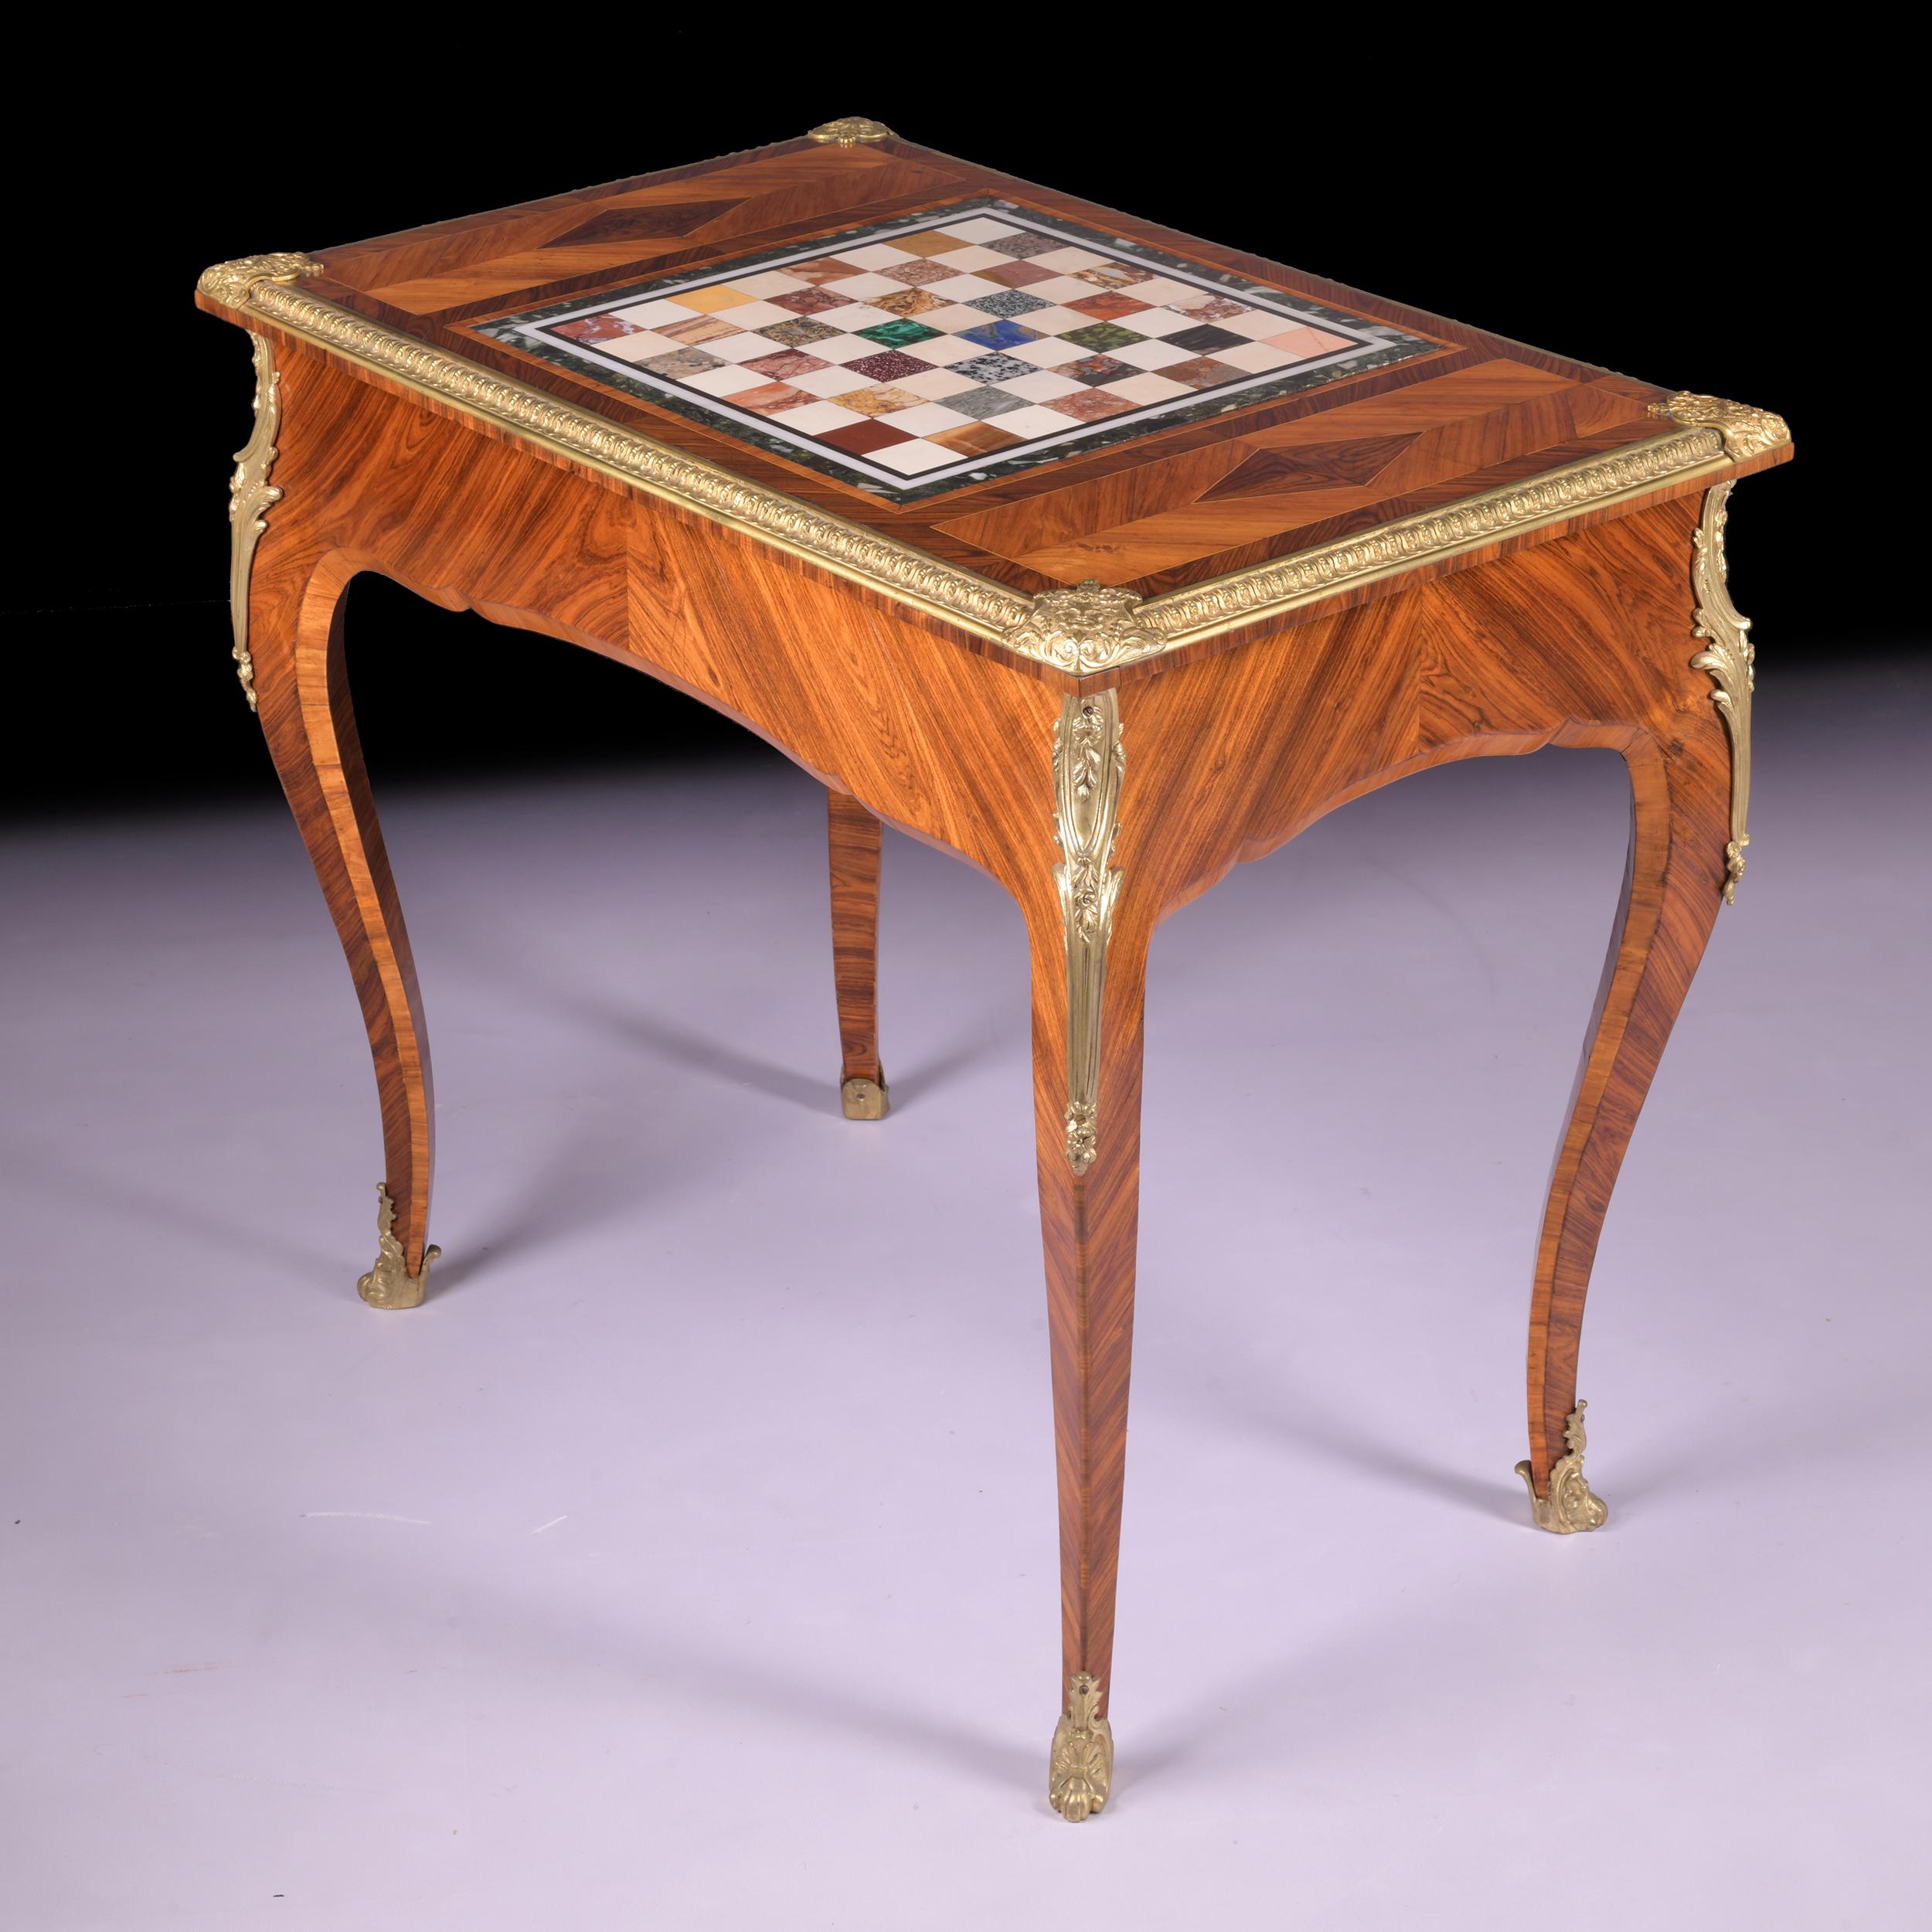 An Exceptional 19th century specimen table, constructed in Kingwood and Gonzalo alves, with the rectangular top centred by a specimen marble inset chess board including Porphyry, Malachite and Lapis Lazuli within multiple bandings, the gadrooned